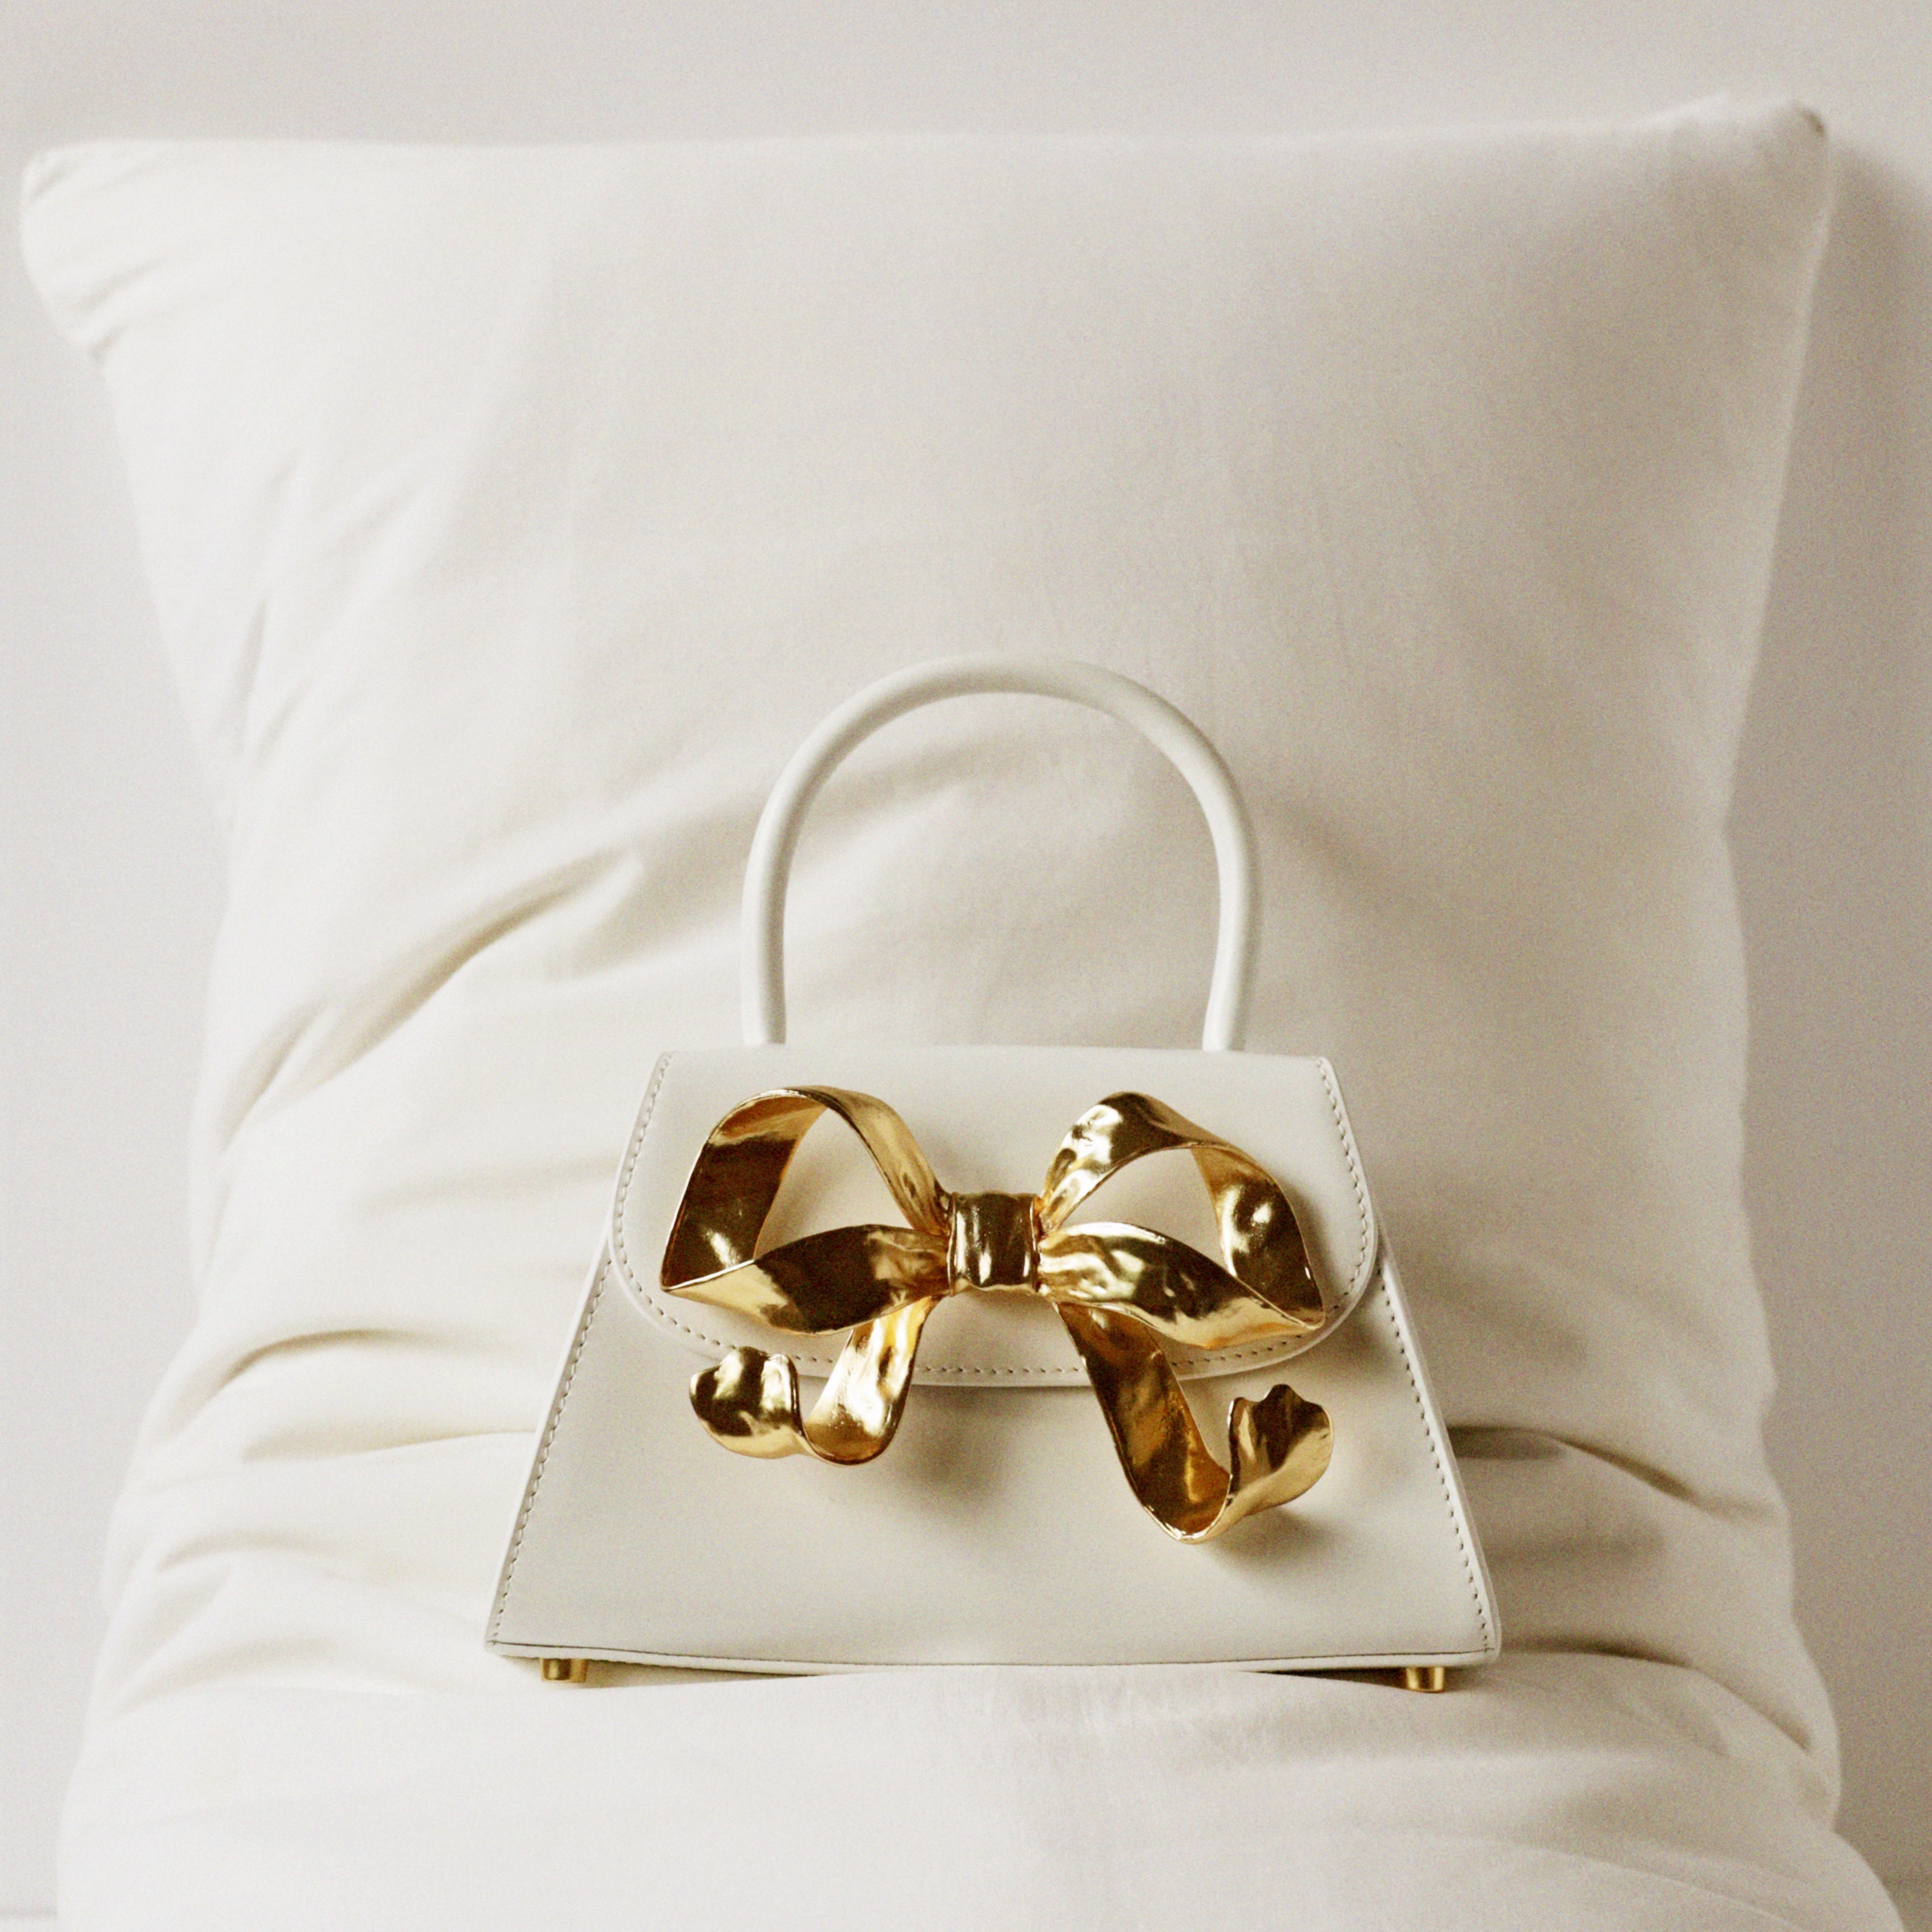 The Bow Mini in White with Gold Hardware - 7